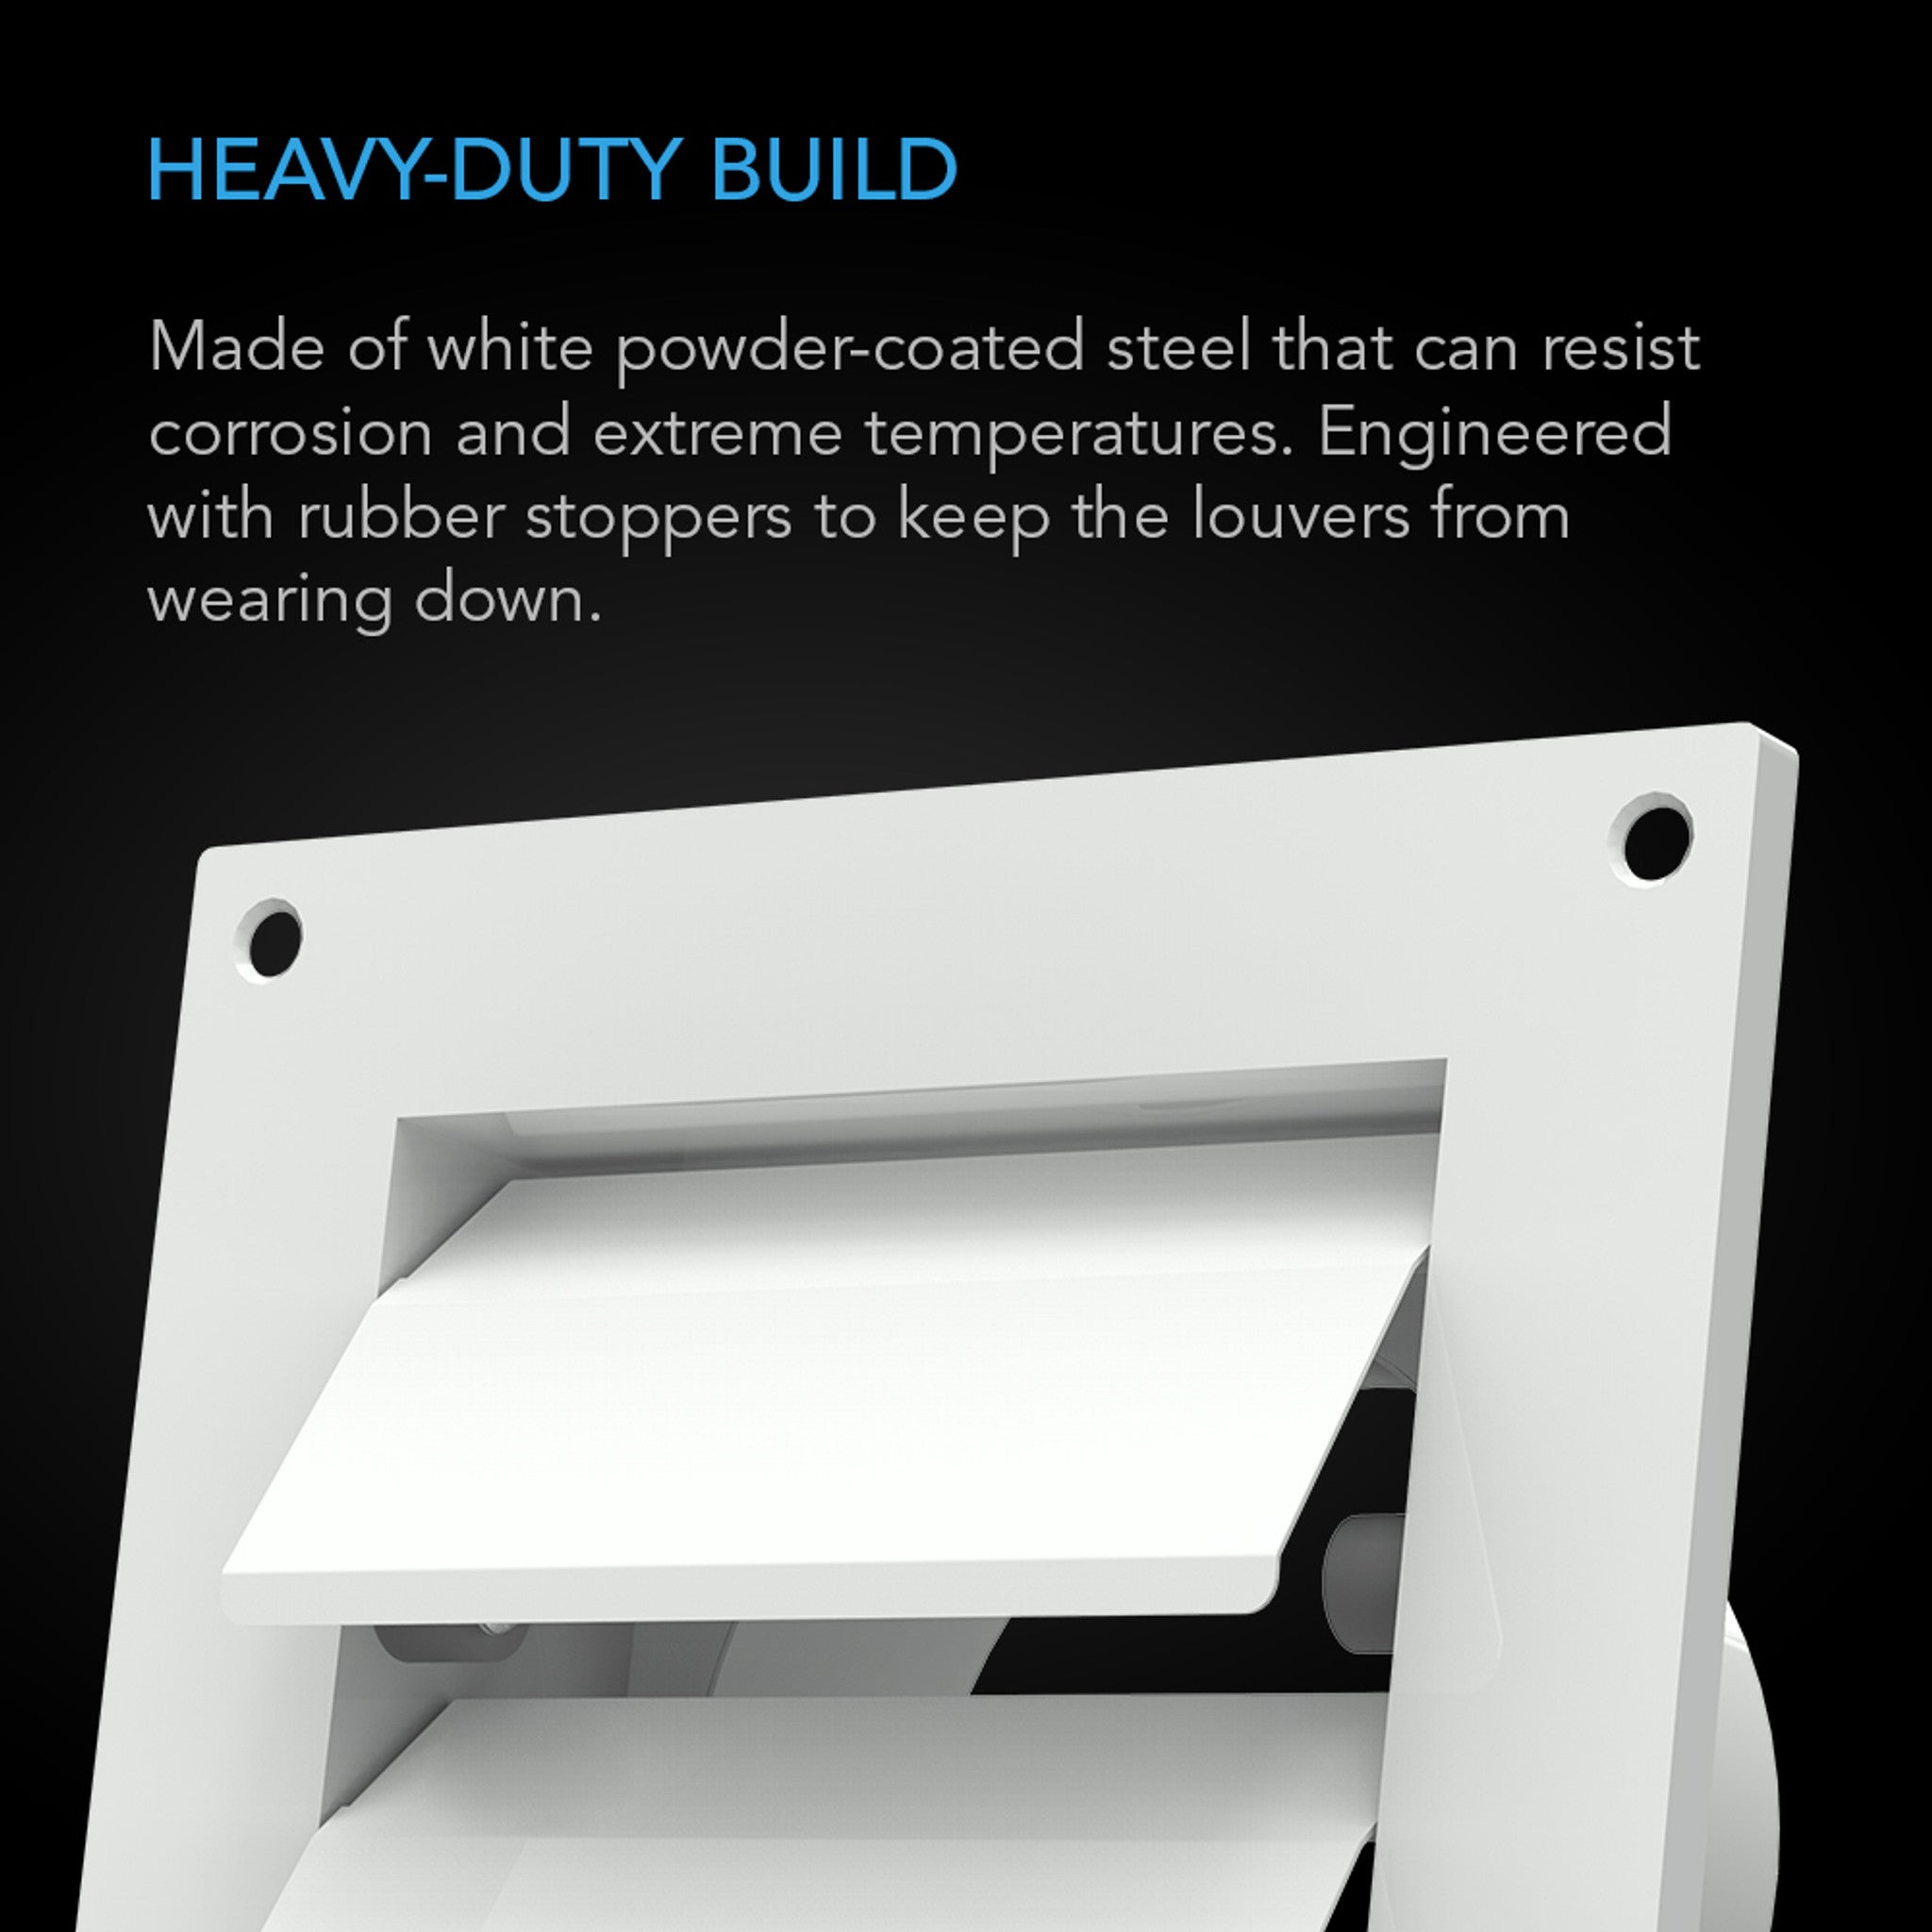 Product Secondary Image:AC Infinity Wall Mount Duct Shutter, White Steel